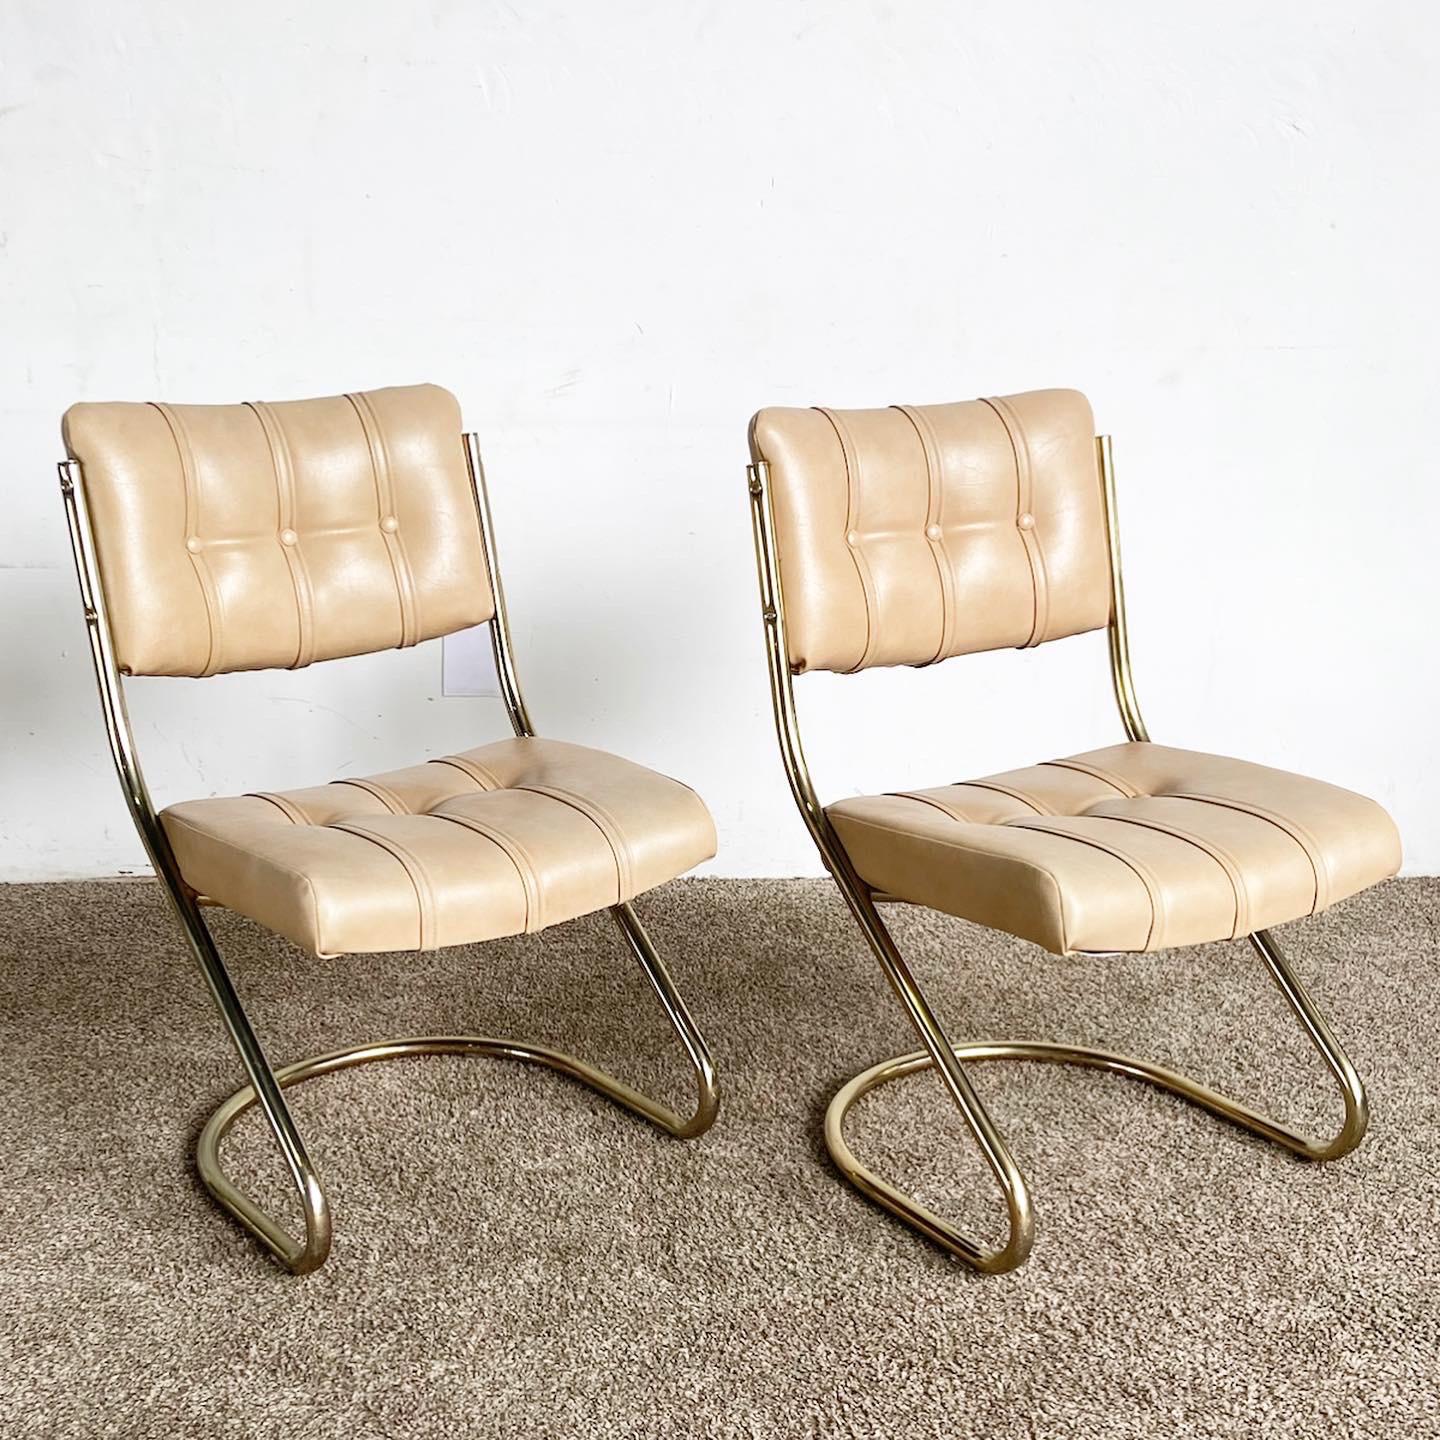 Mid-Century Modern Mid Century Modern Gold and Tan Tufted Cantilever Chairs by Chromcraft - a Pair